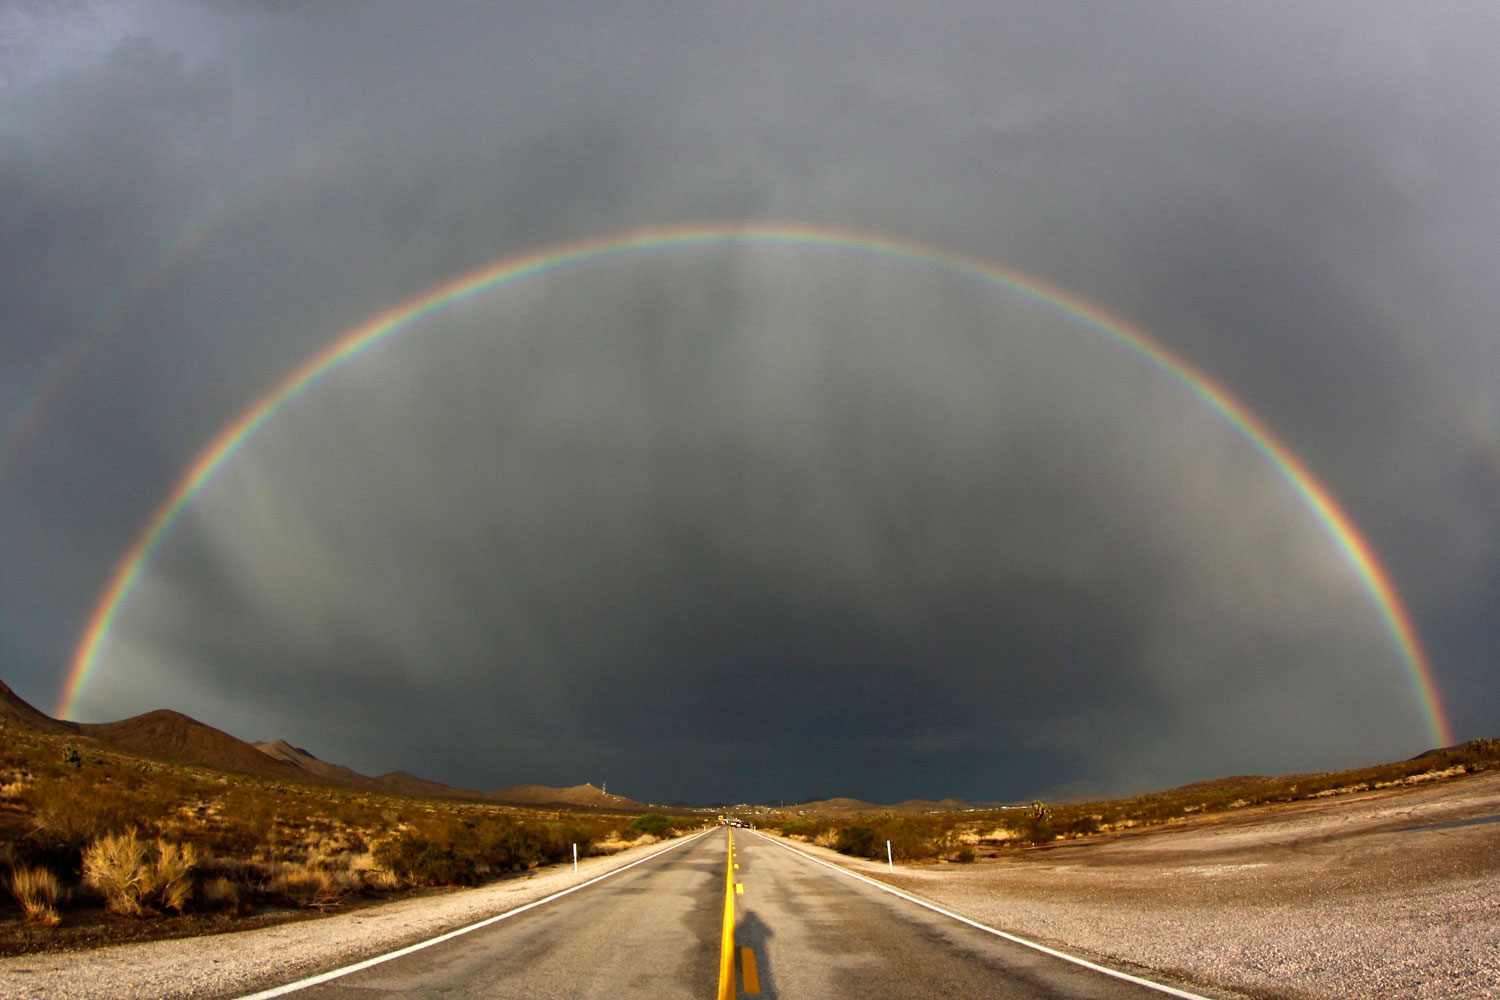 Darkness and Light
                              July 13, 2012. A double rainbow appears after a heavy storm near Searchlight, Nevada.